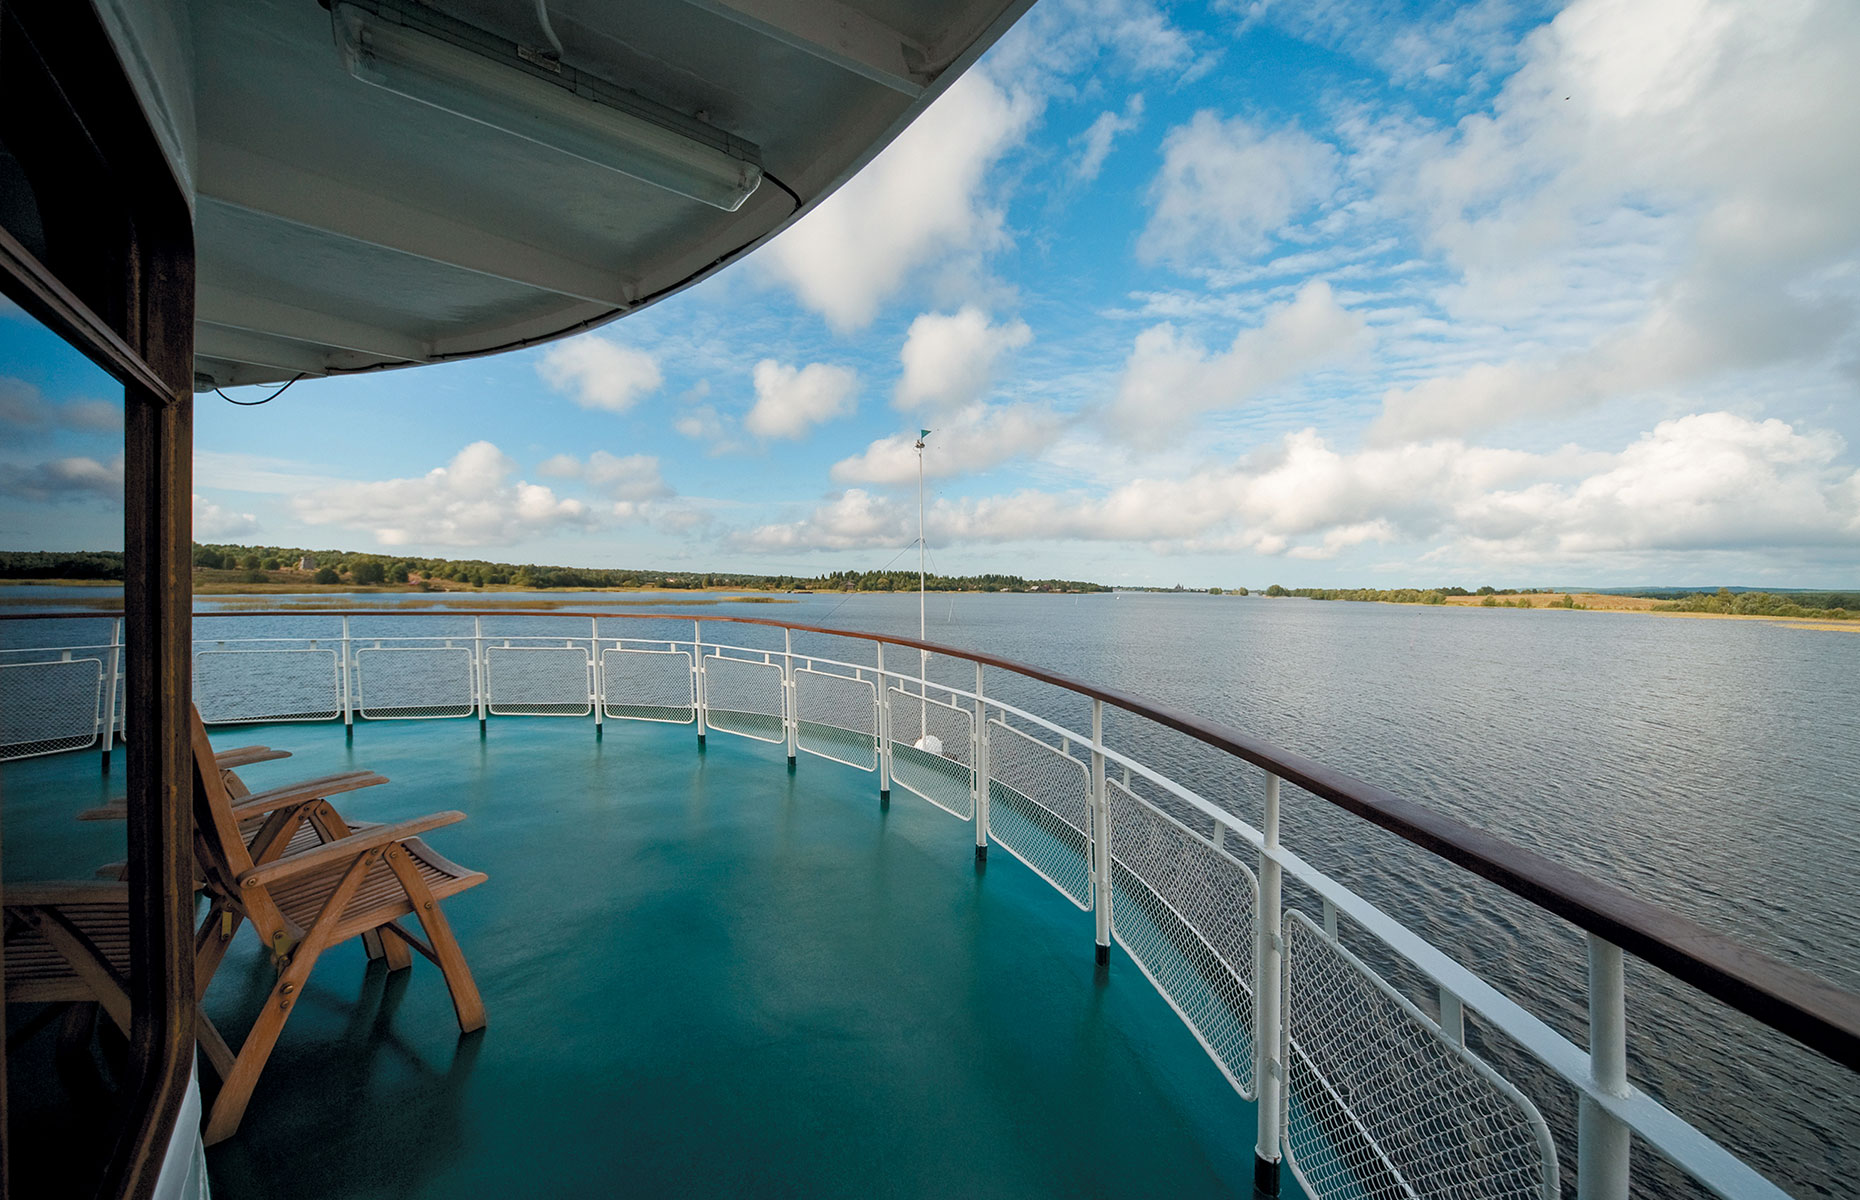 Volga Dream's deck is the perfect spot to watch the world go by (Courtesy of Volga Dream)